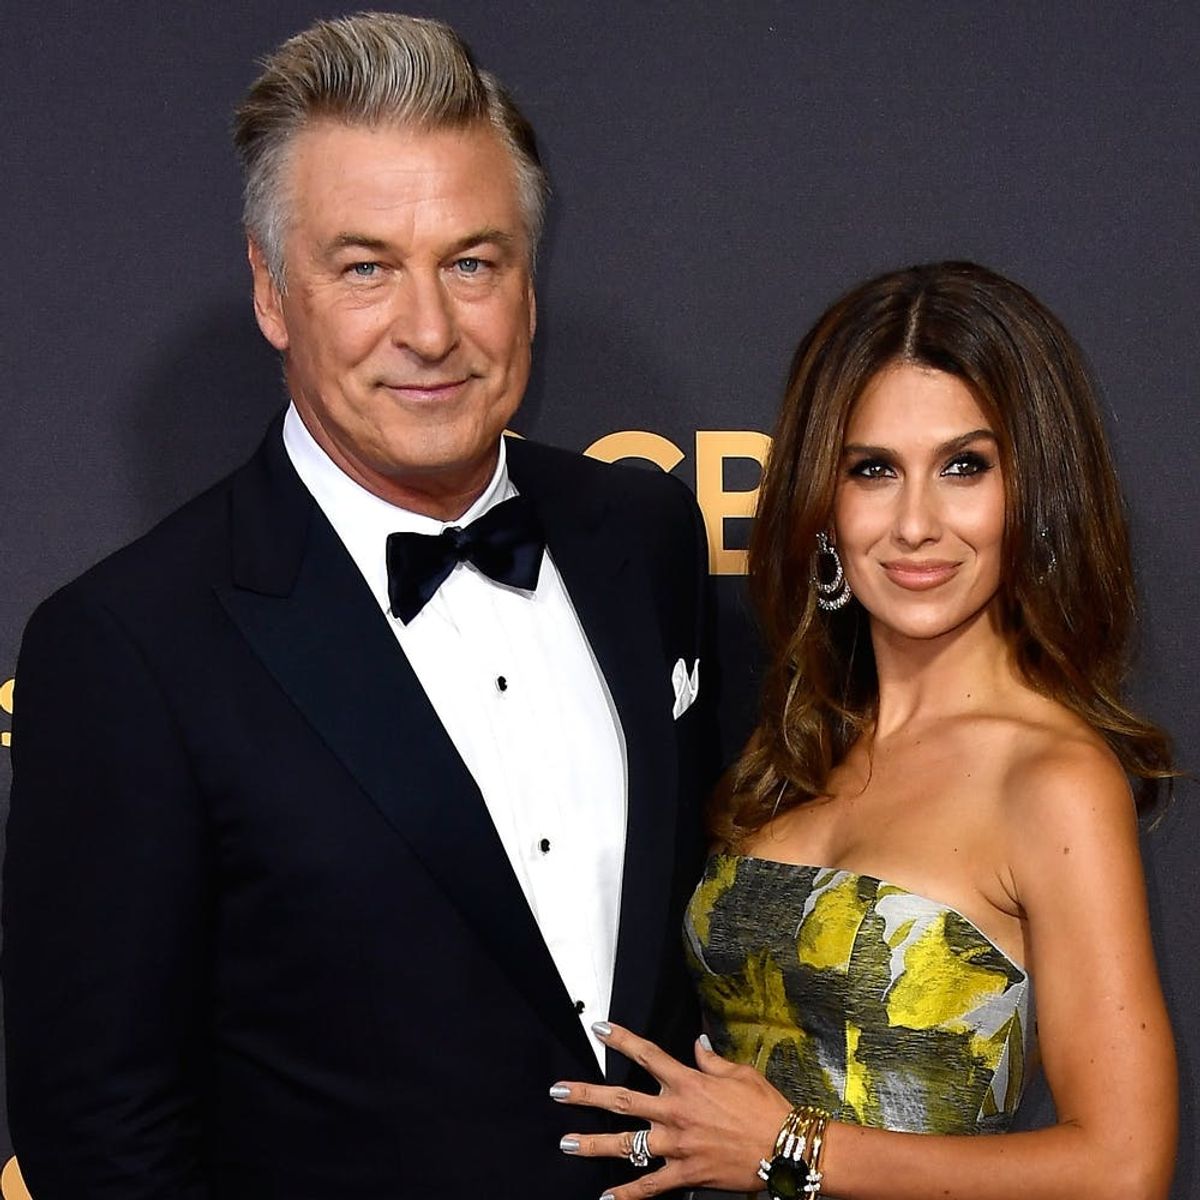 Find Out What Hilaria and Alec Baldwin Named Their Baby Boy!